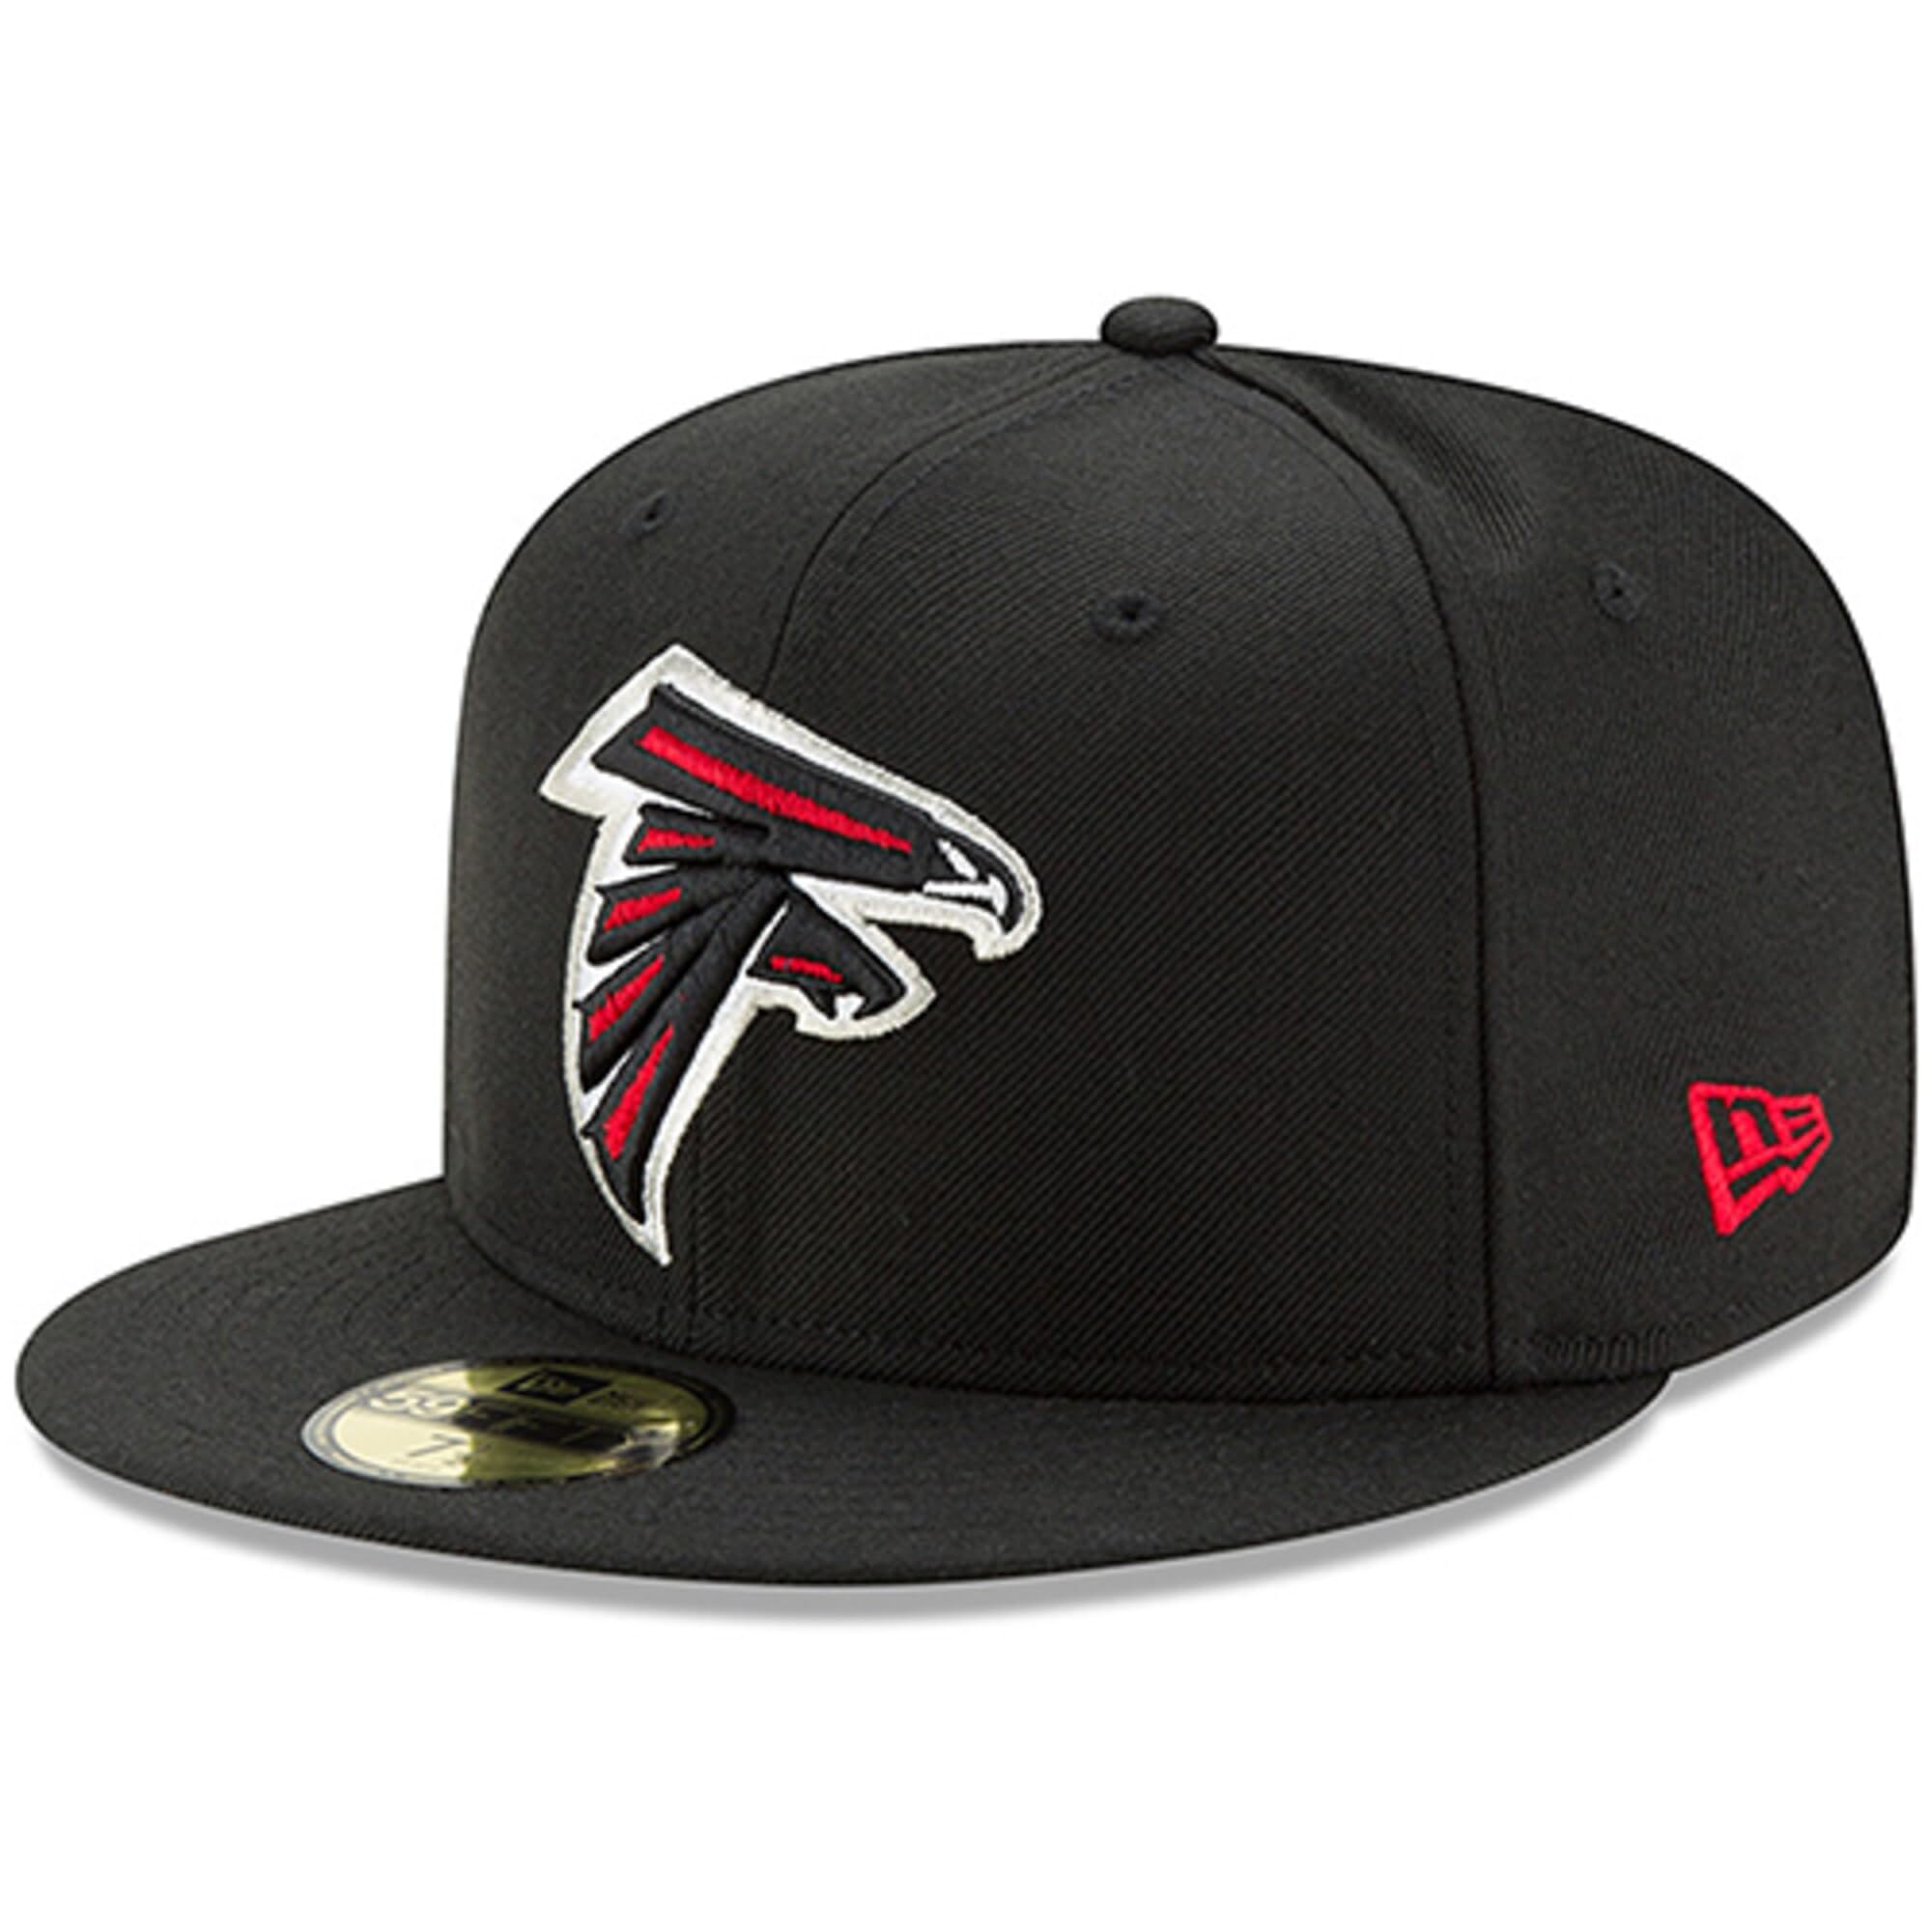 New Era NFL 59FIFTY Team Color Authentic Collection Fitted On Field Game Cap Hat (7 1/4, Atlanta Falcons) - Caps Fitted Caps Fitted New Era